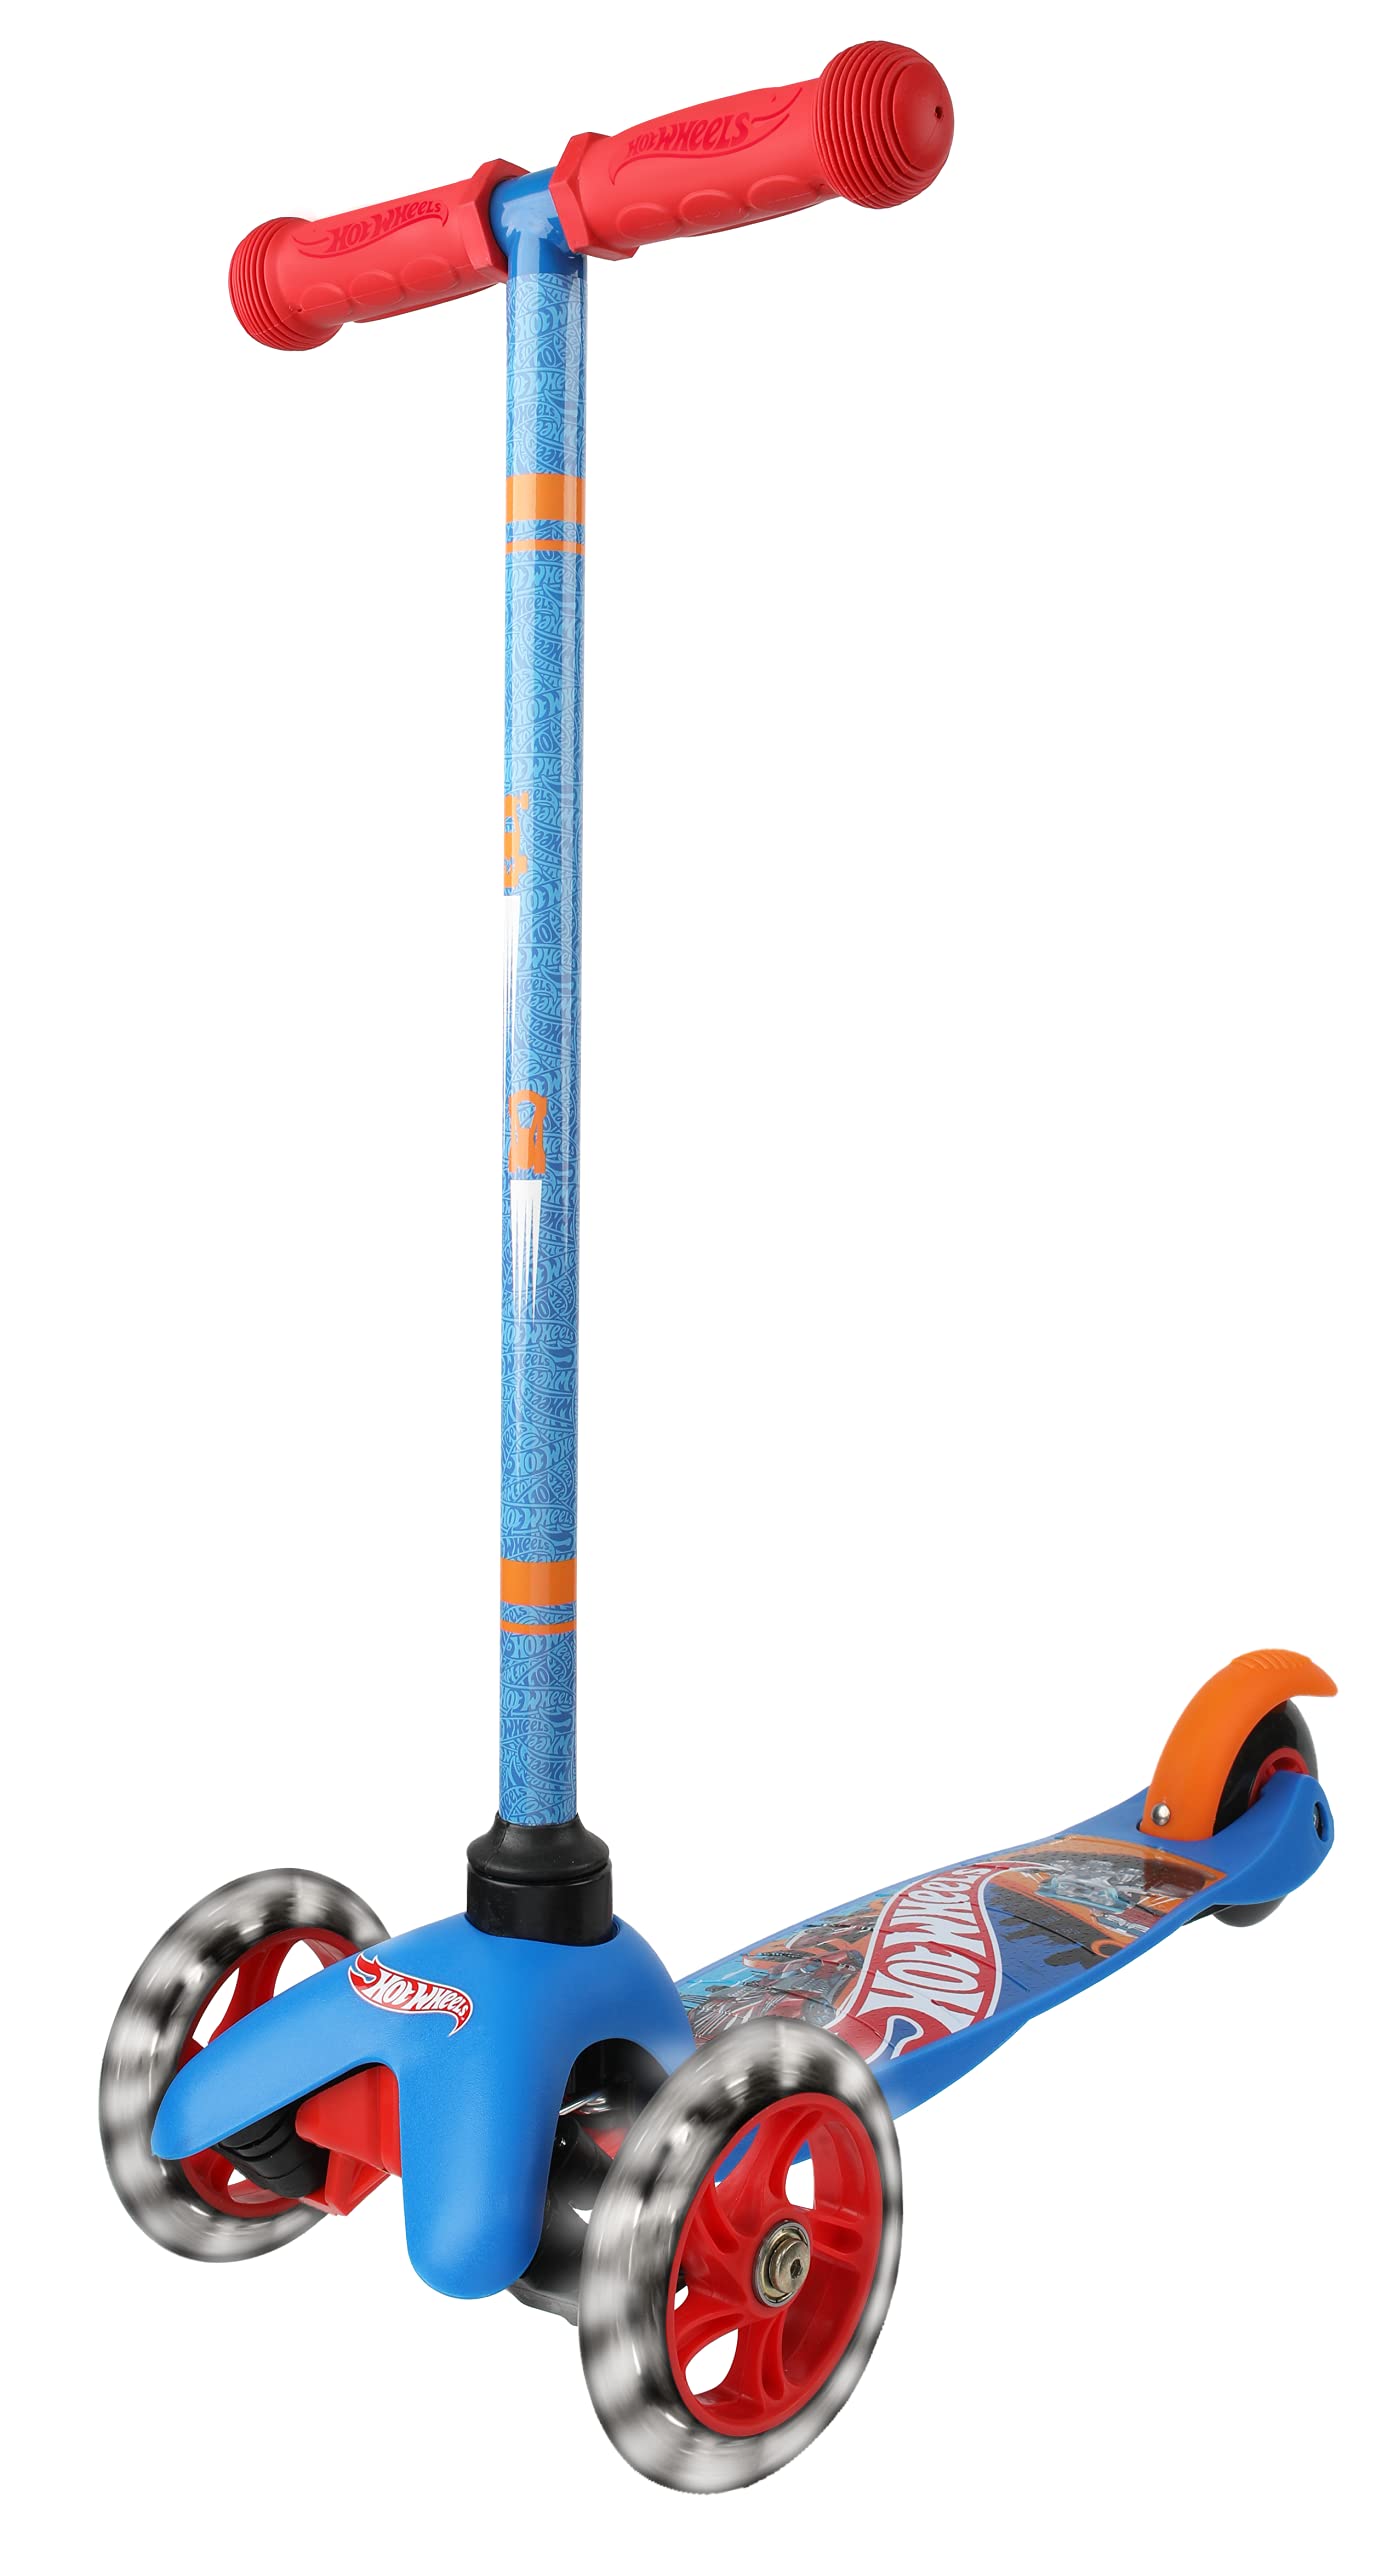 Hot Wheels Self-Balancing Scooter for Kids